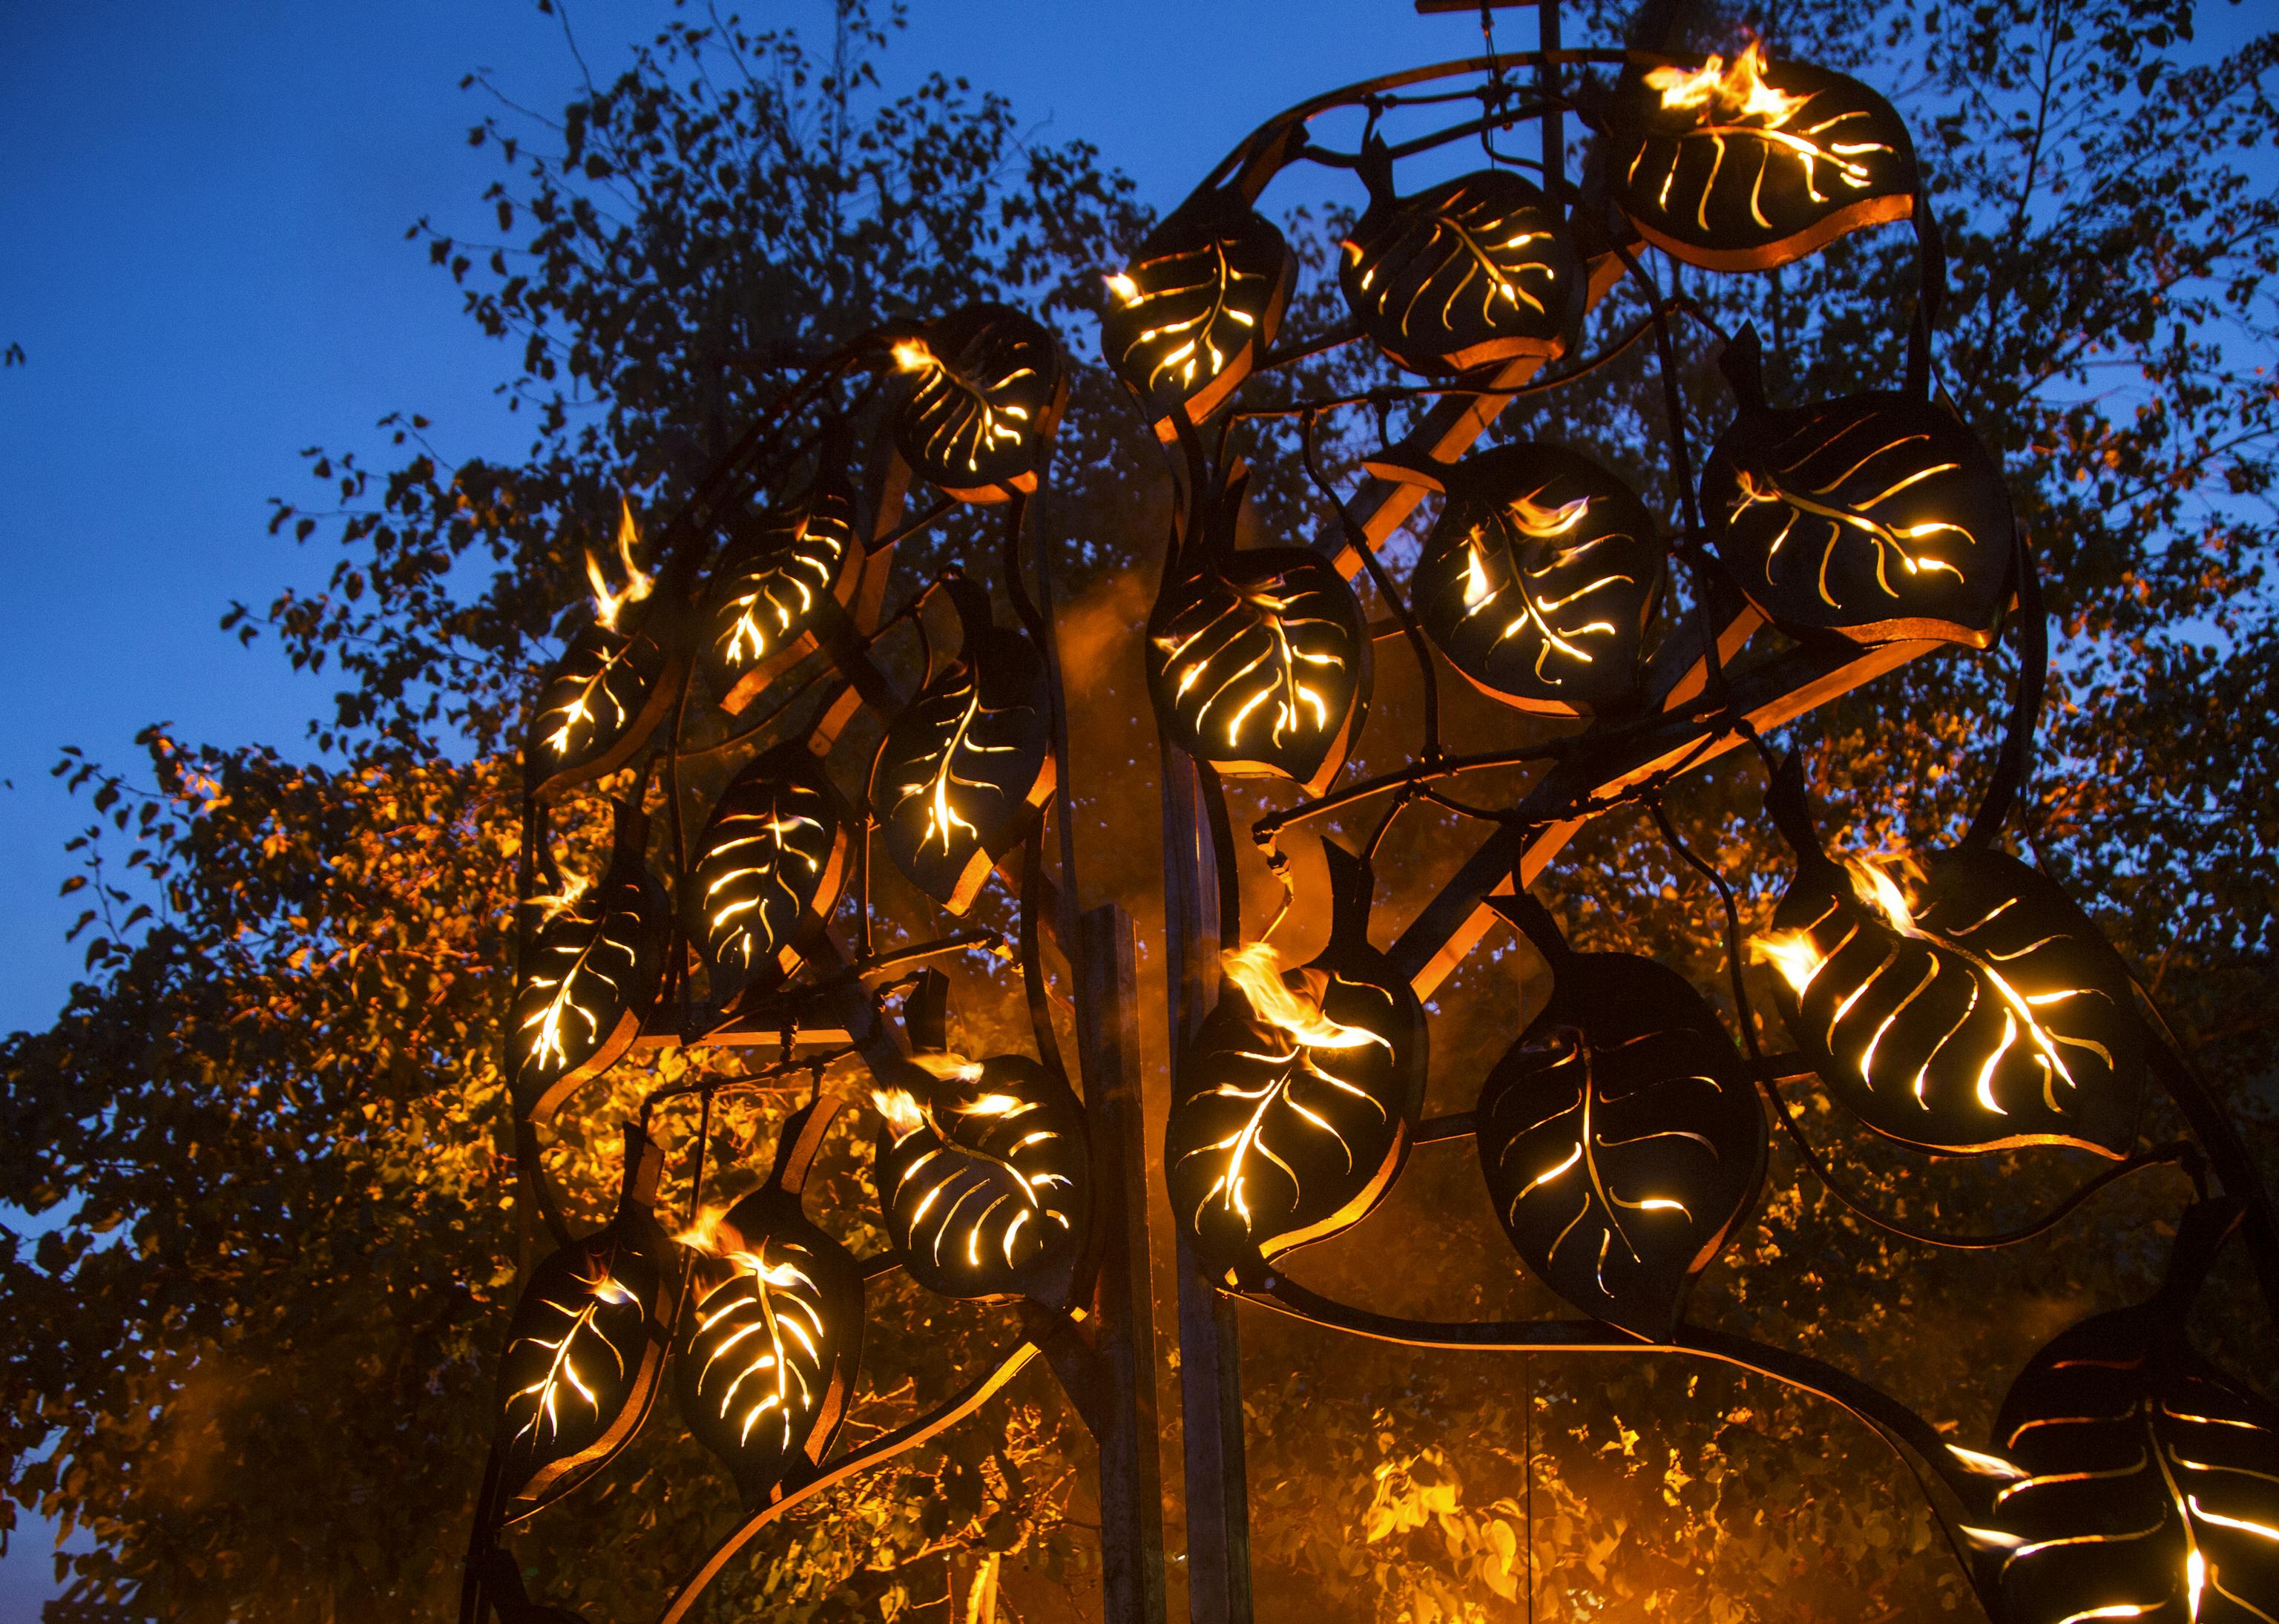 A metal tree illuminated from the inside with fire